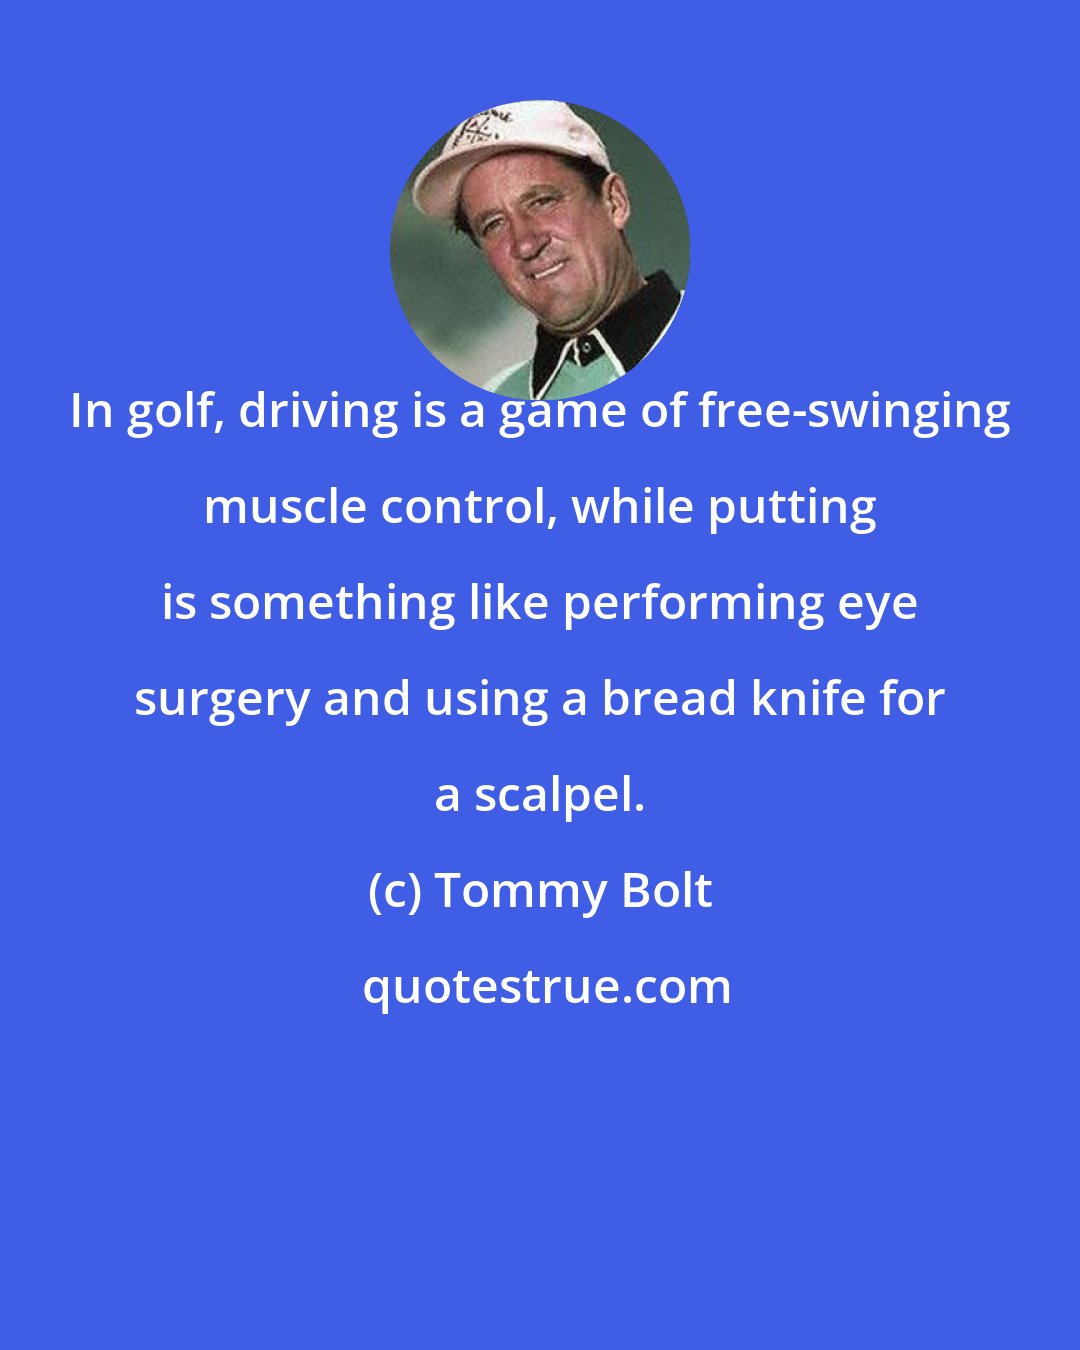 Tommy Bolt: In golf, driving is a game of free-swinging muscle control, while putting is something like performing eye surgery and using a bread knife for a scalpel.